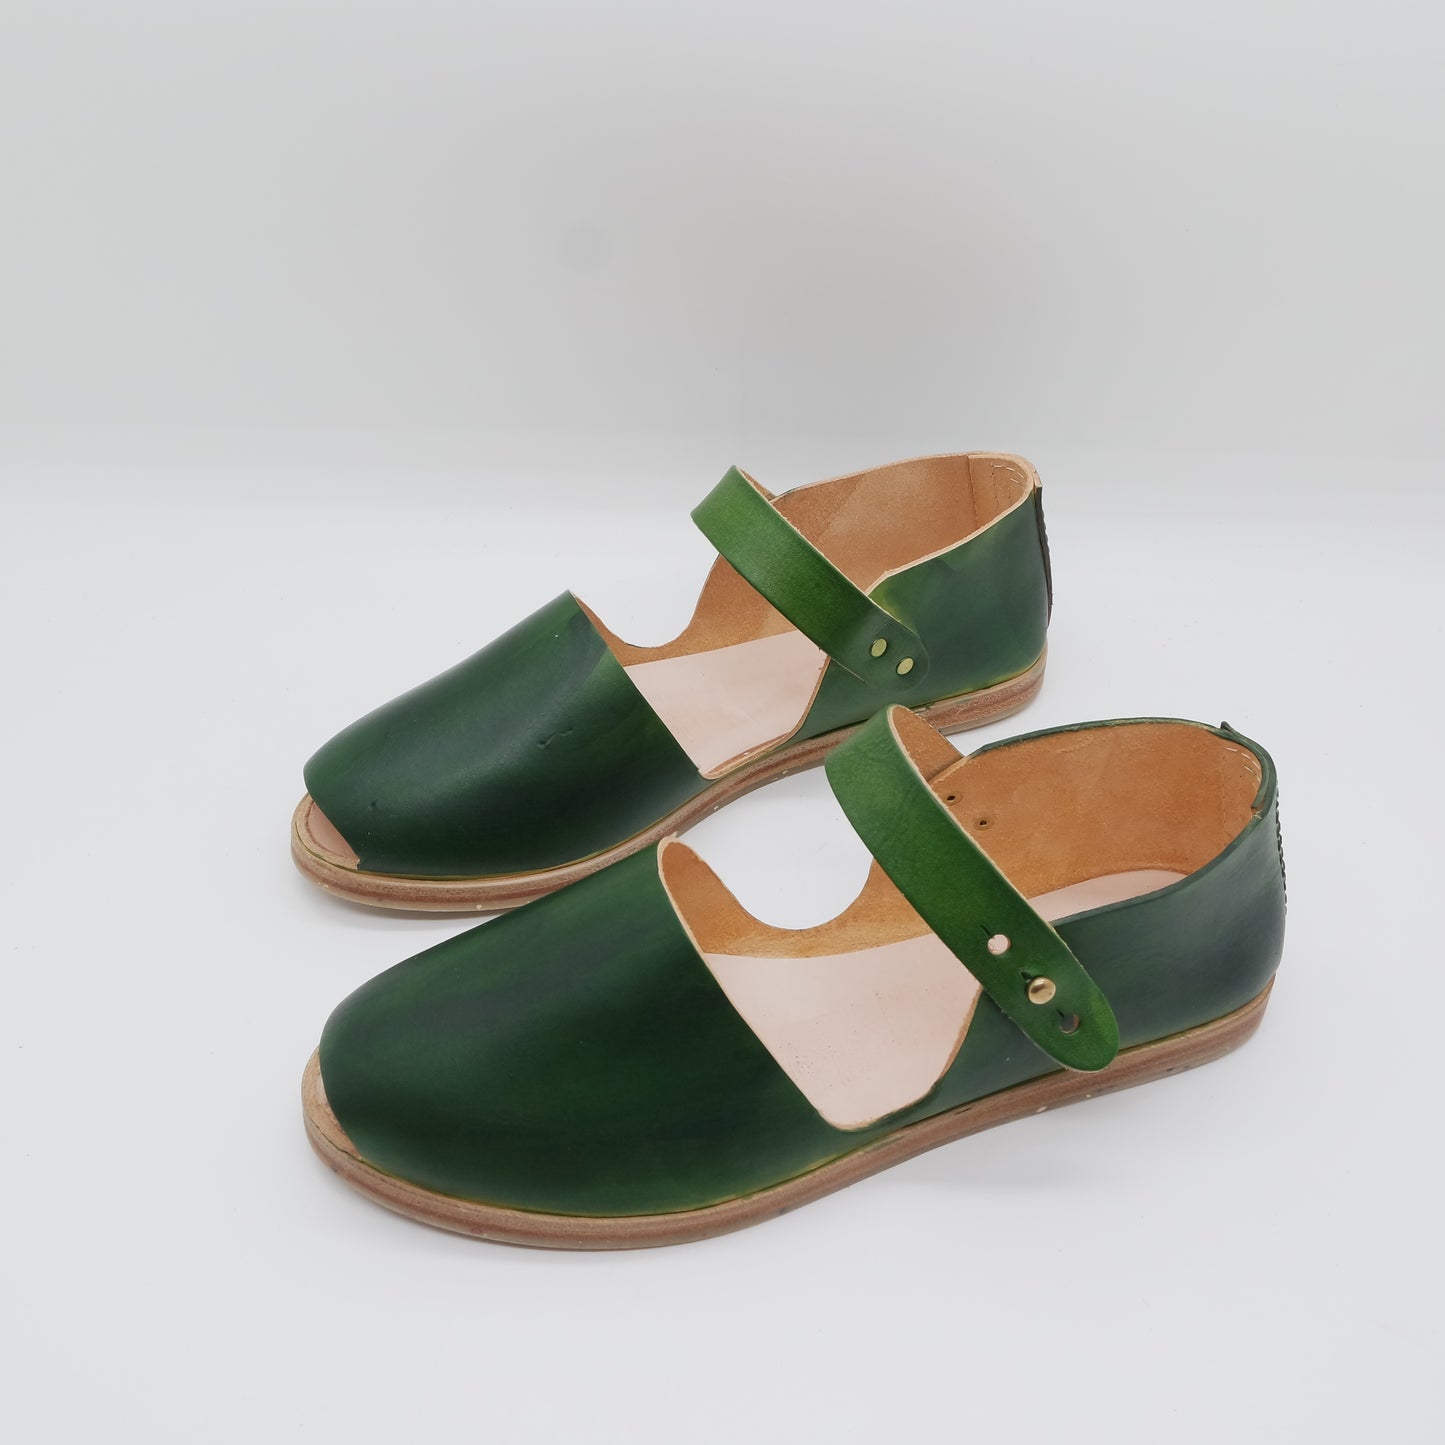 a pair of  handmade green shoes on a white surface